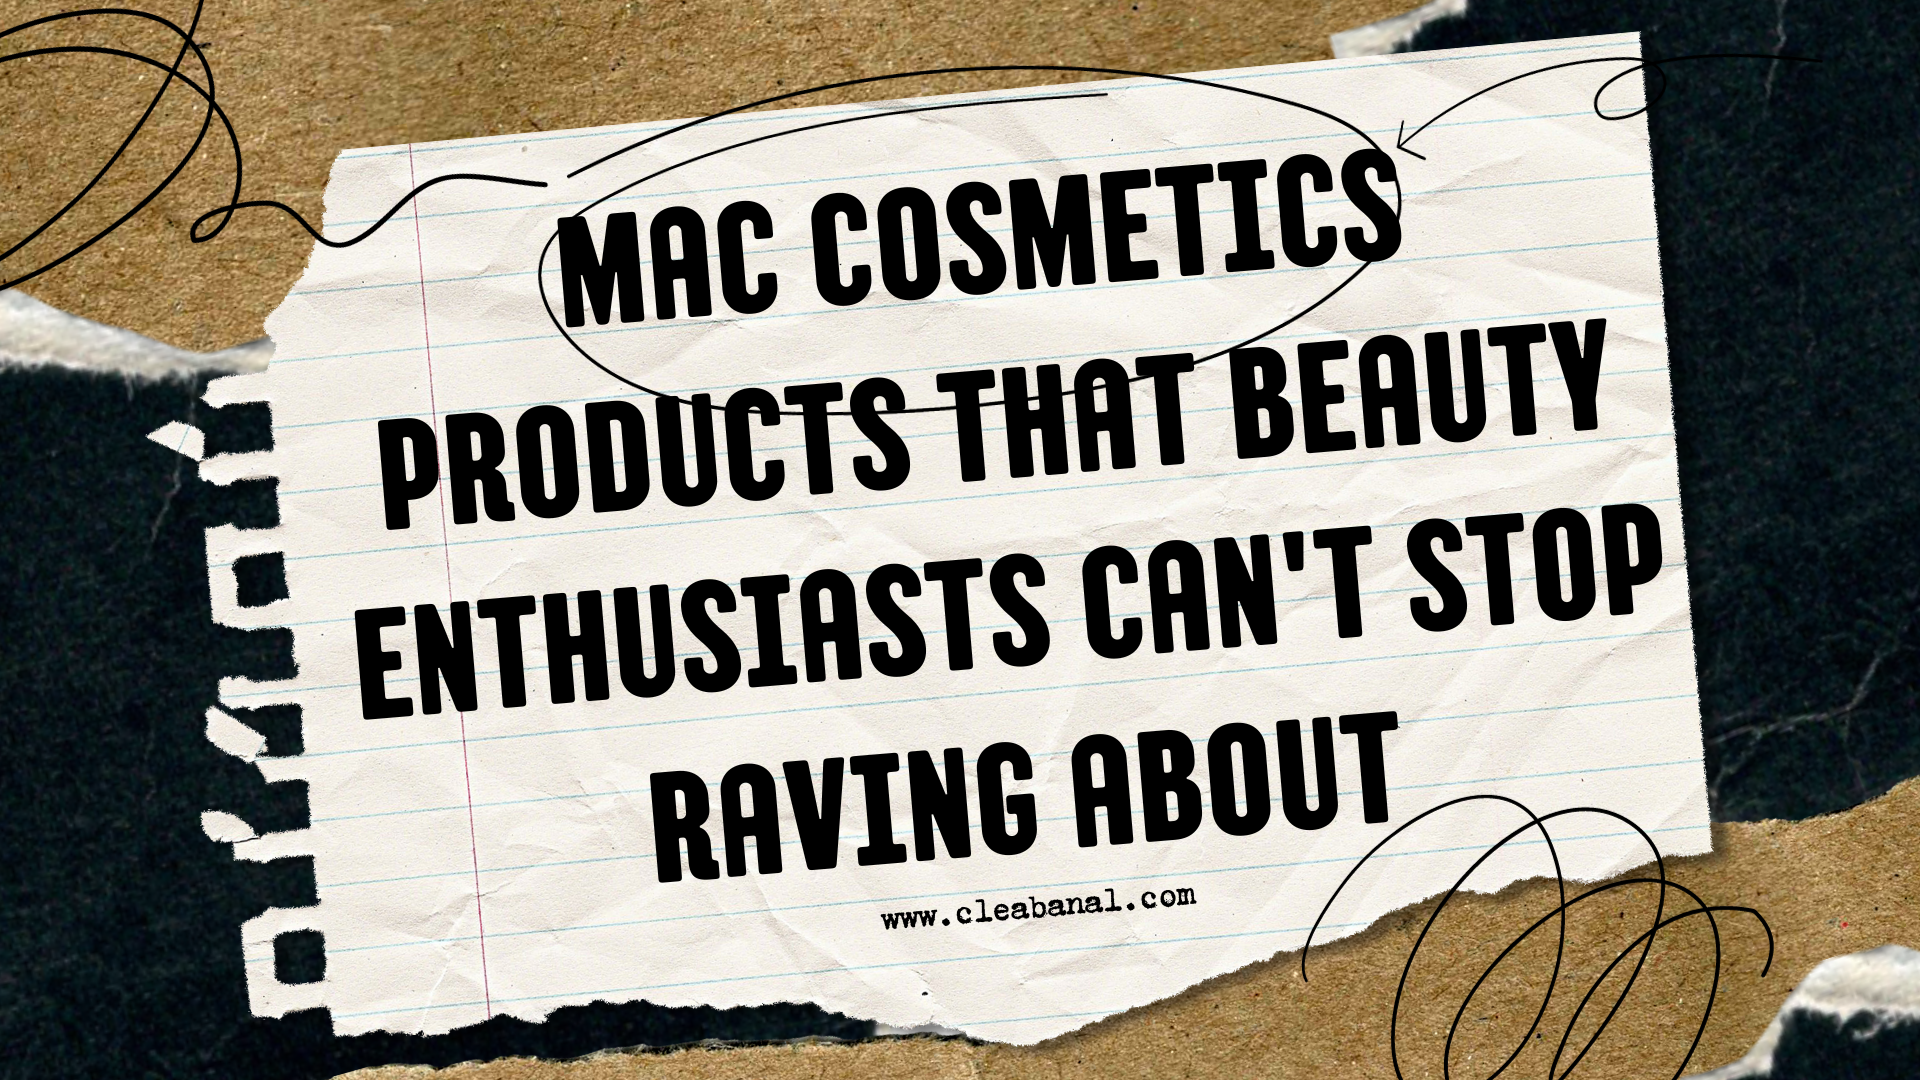 MAC Cosmetics Products That Beauty Enthusiasts Can't Stop Raving About